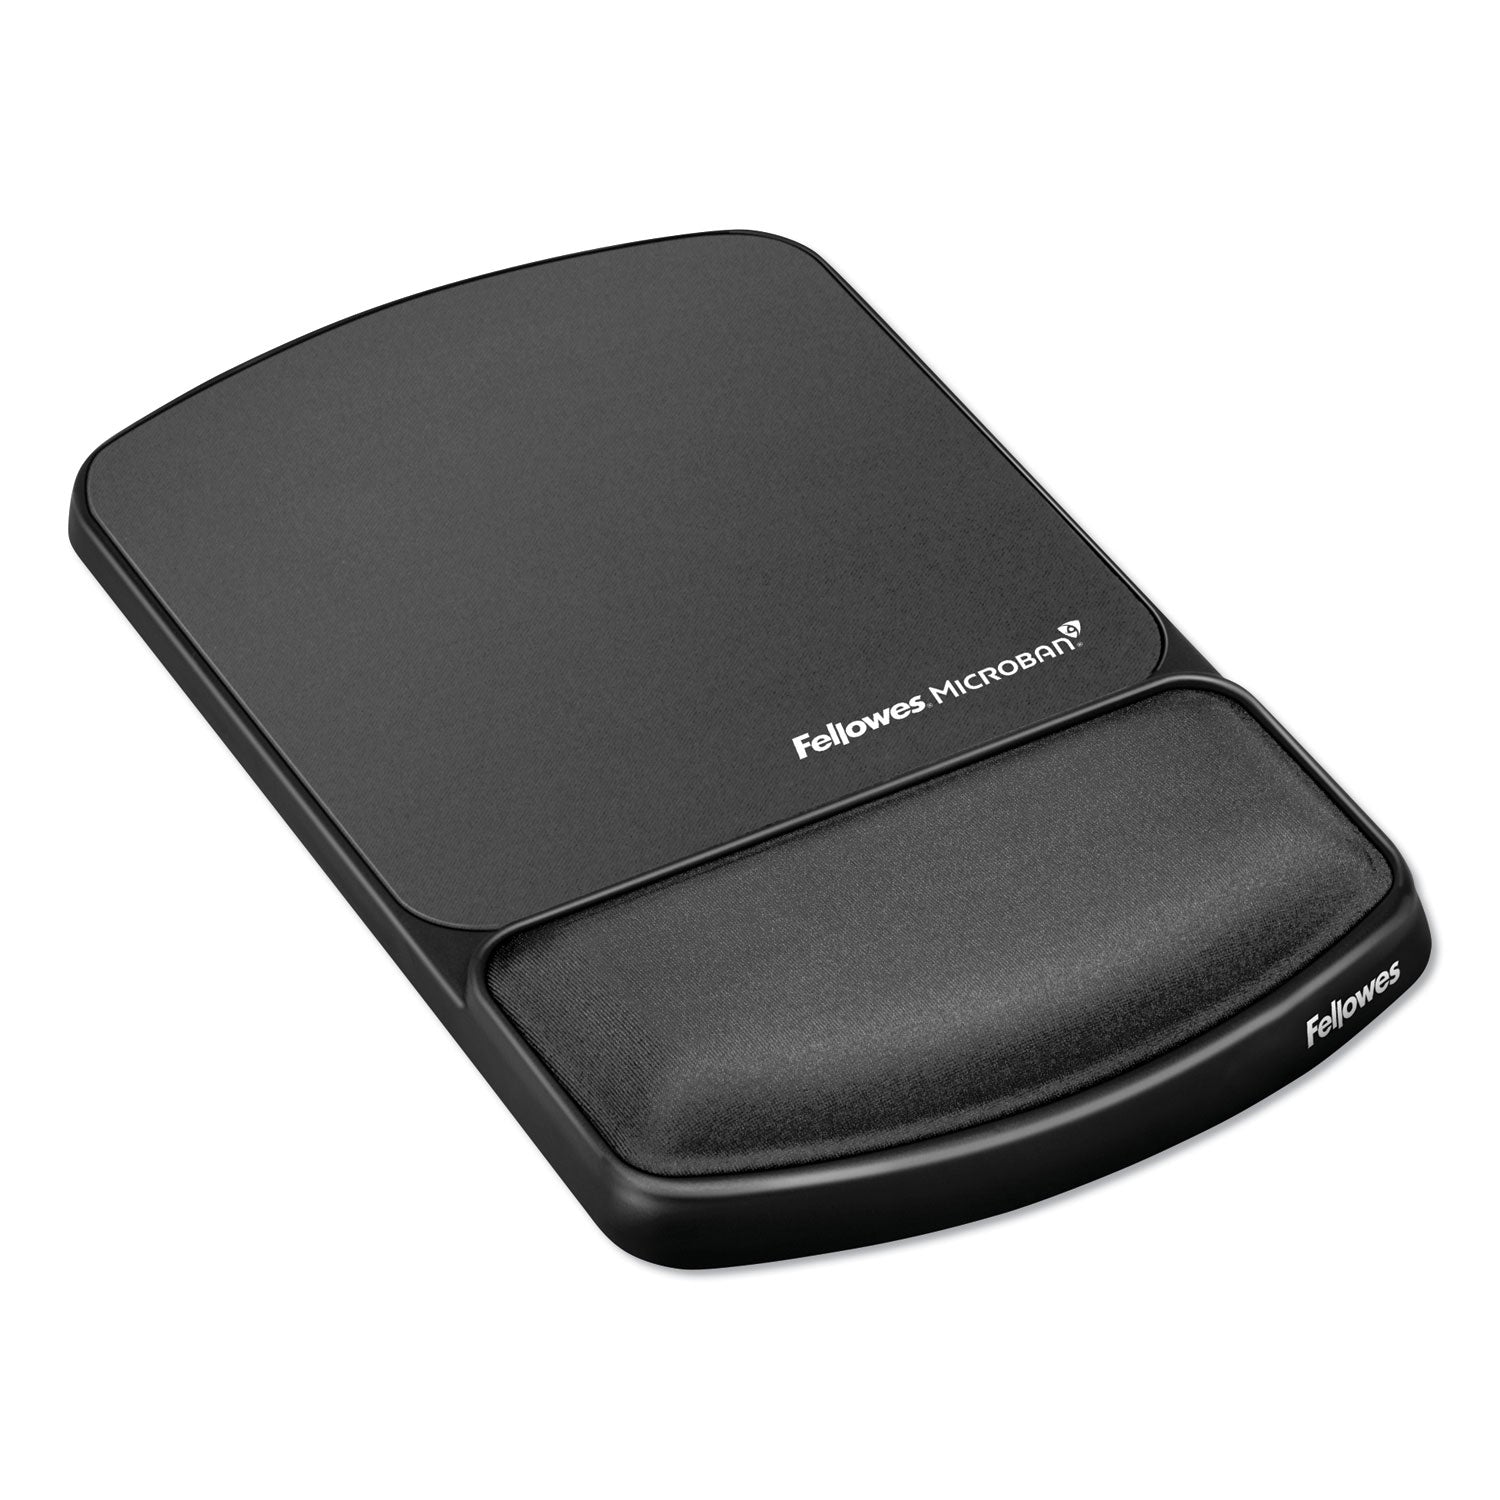 Mouse Pad with Wrist Support with Microban Protection, 6.75 x 10.12, Graphite - 